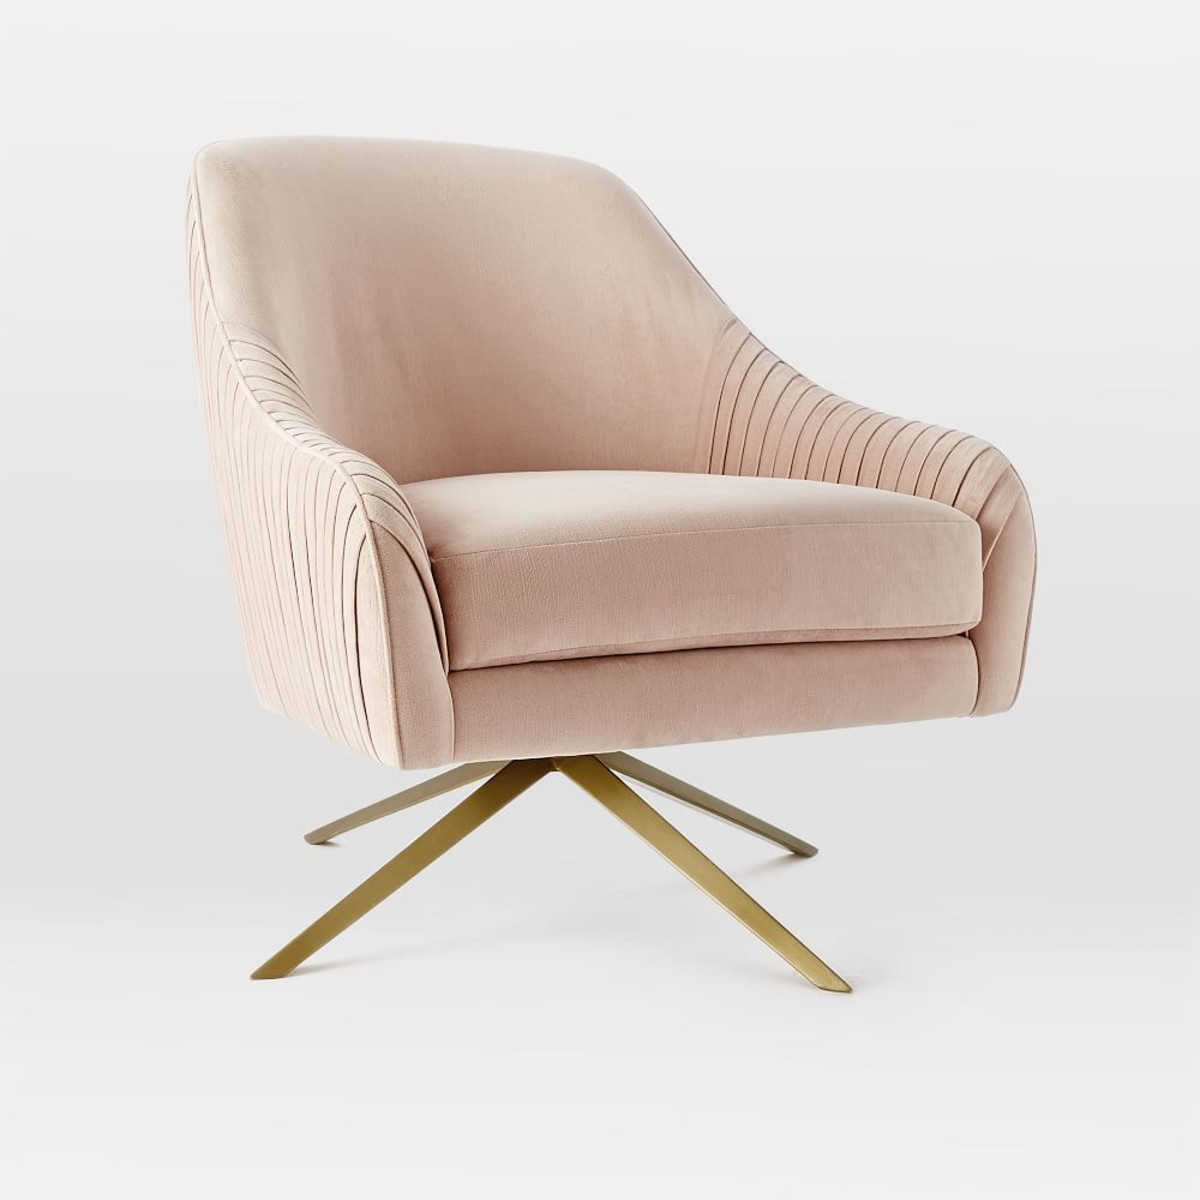 15 Recommended West Elm Honeycomb Vase 2024 free download west elm honeycomb vase of roar rabbitac284c2a2 west elm australia with regard to roar rabbitac284c2a2 swivel chair dusty blush